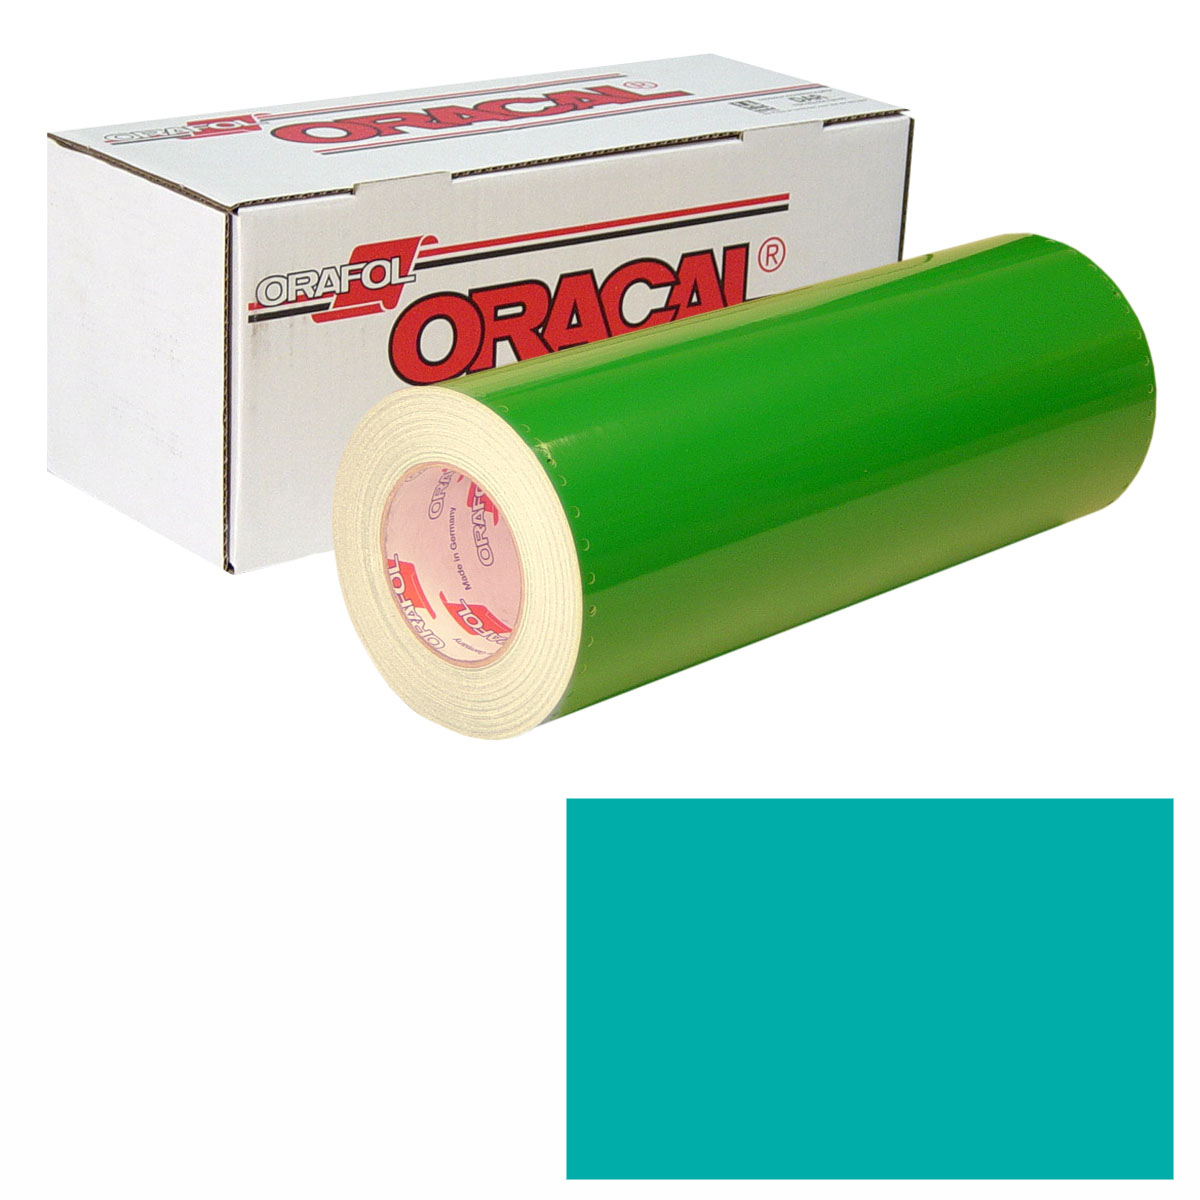 ORACAL 651 Unp 48in X 50yd 054 Turquoise